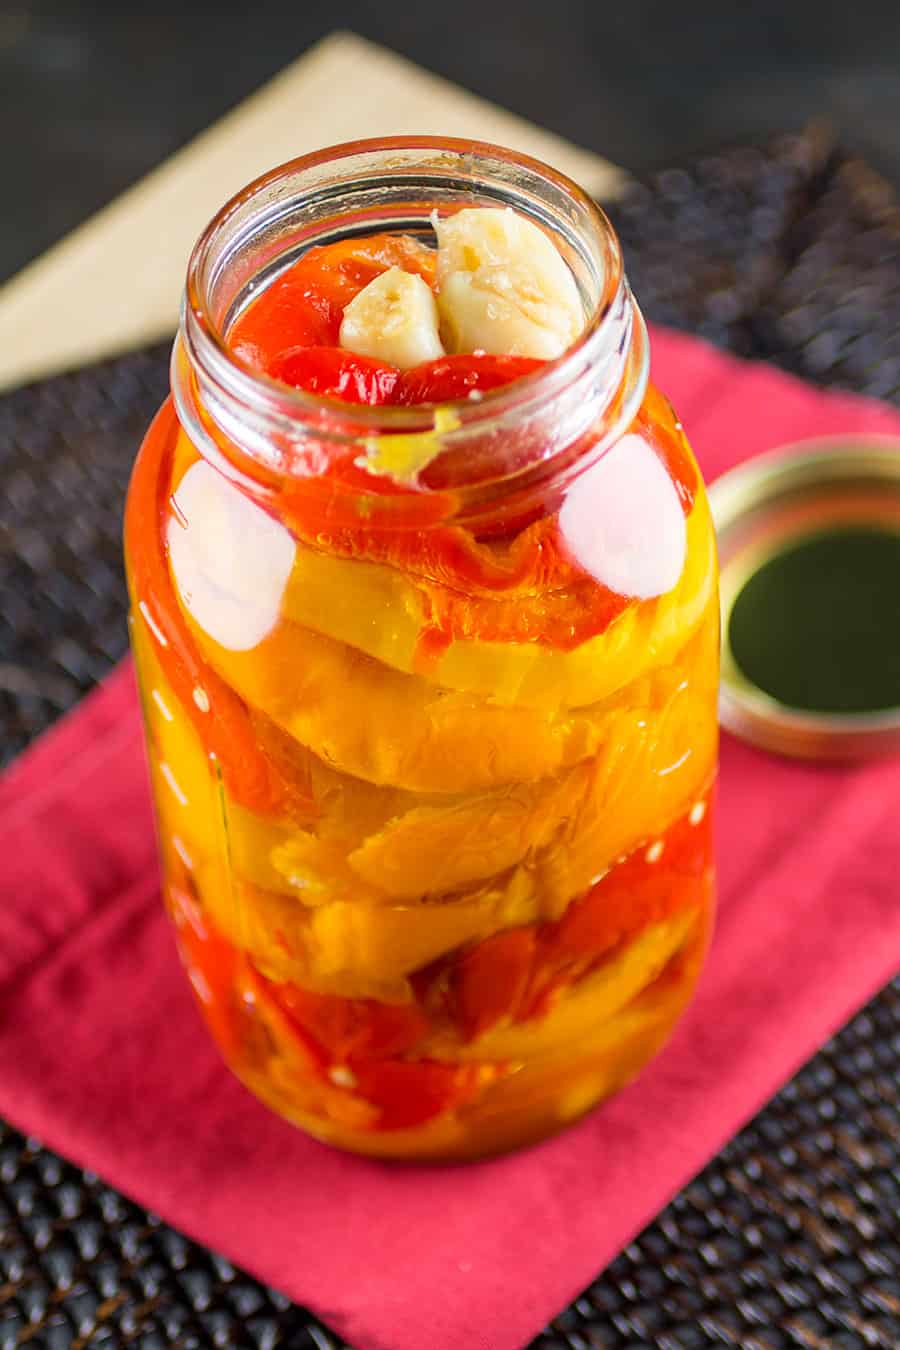 Roasted Peppers in Garlic Olive Oil